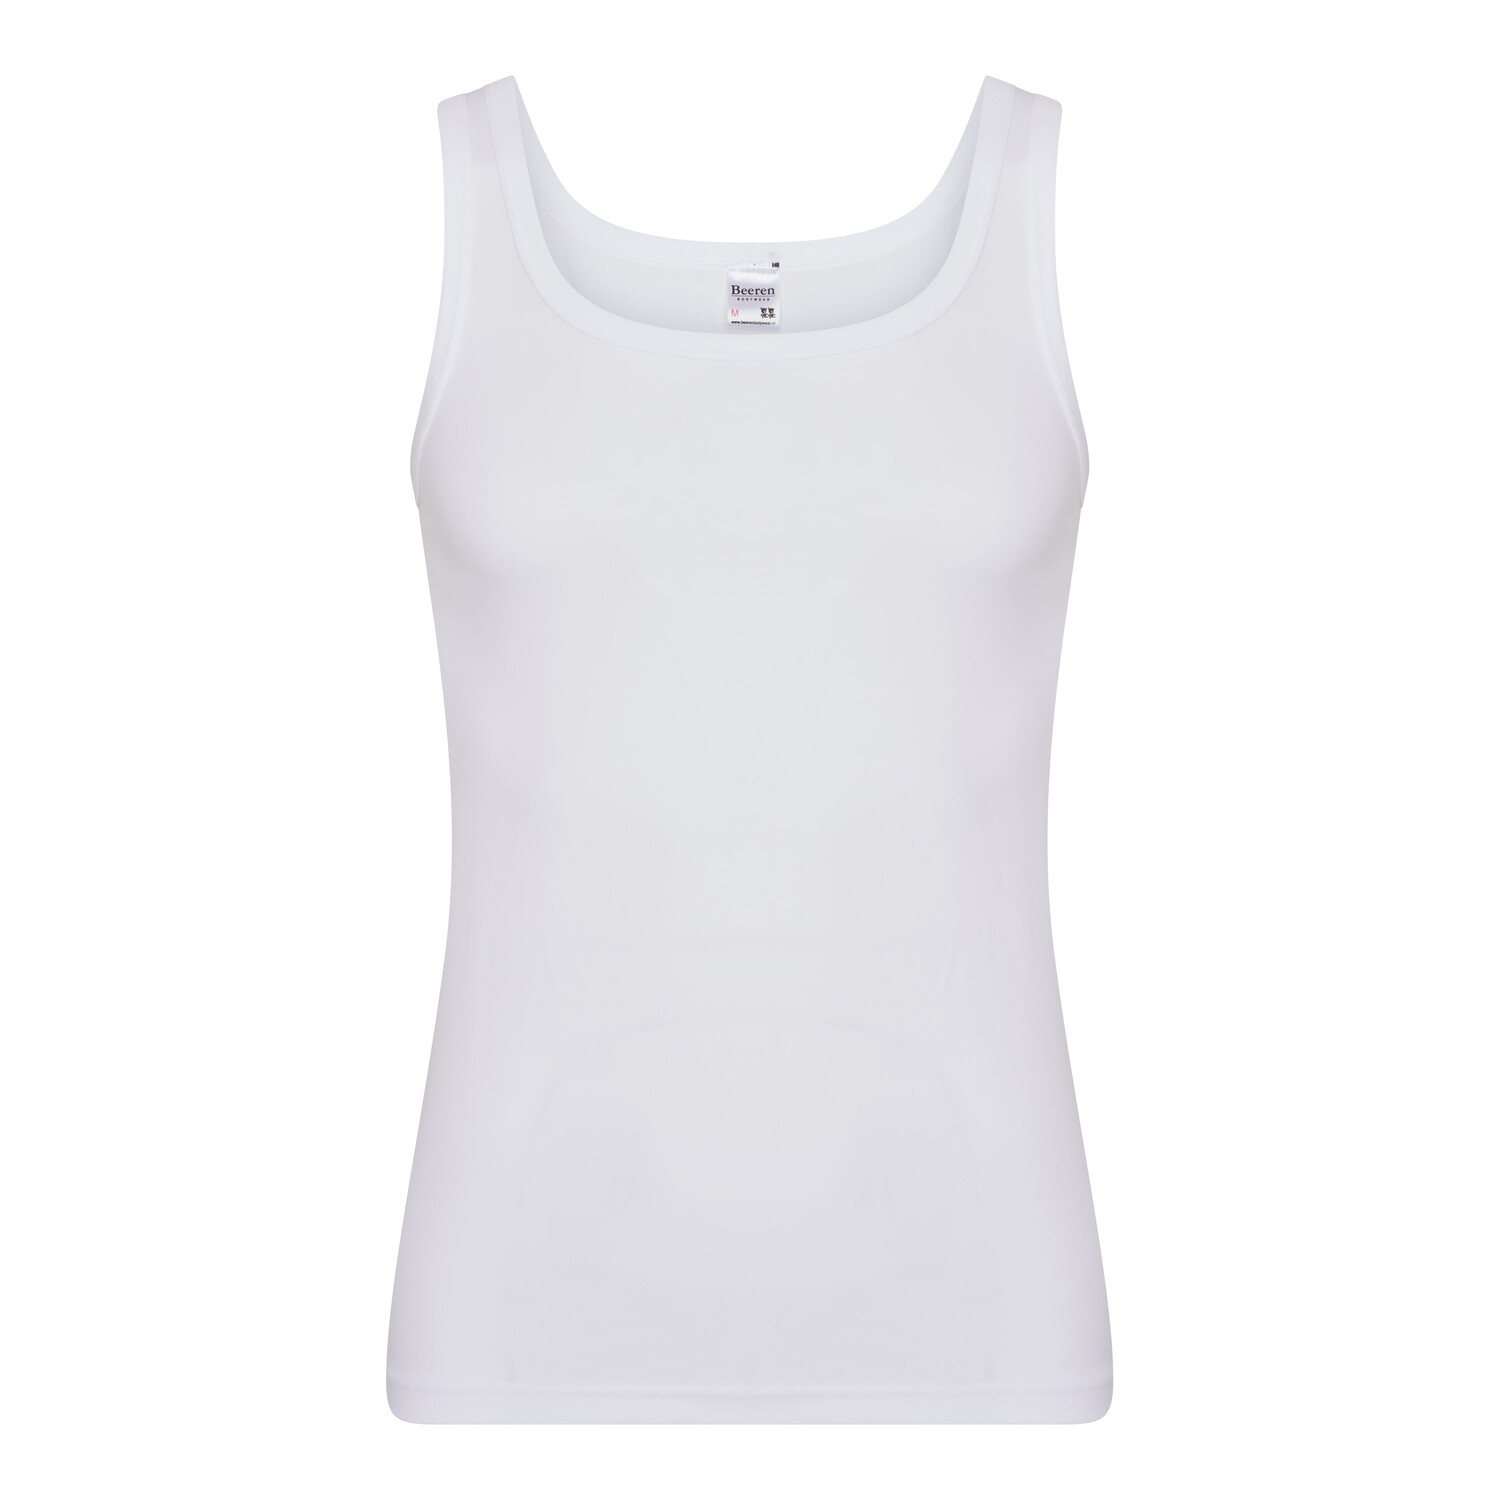 (09-217) Heren singlet Young wit XXL, Size: XXL, Color: wit